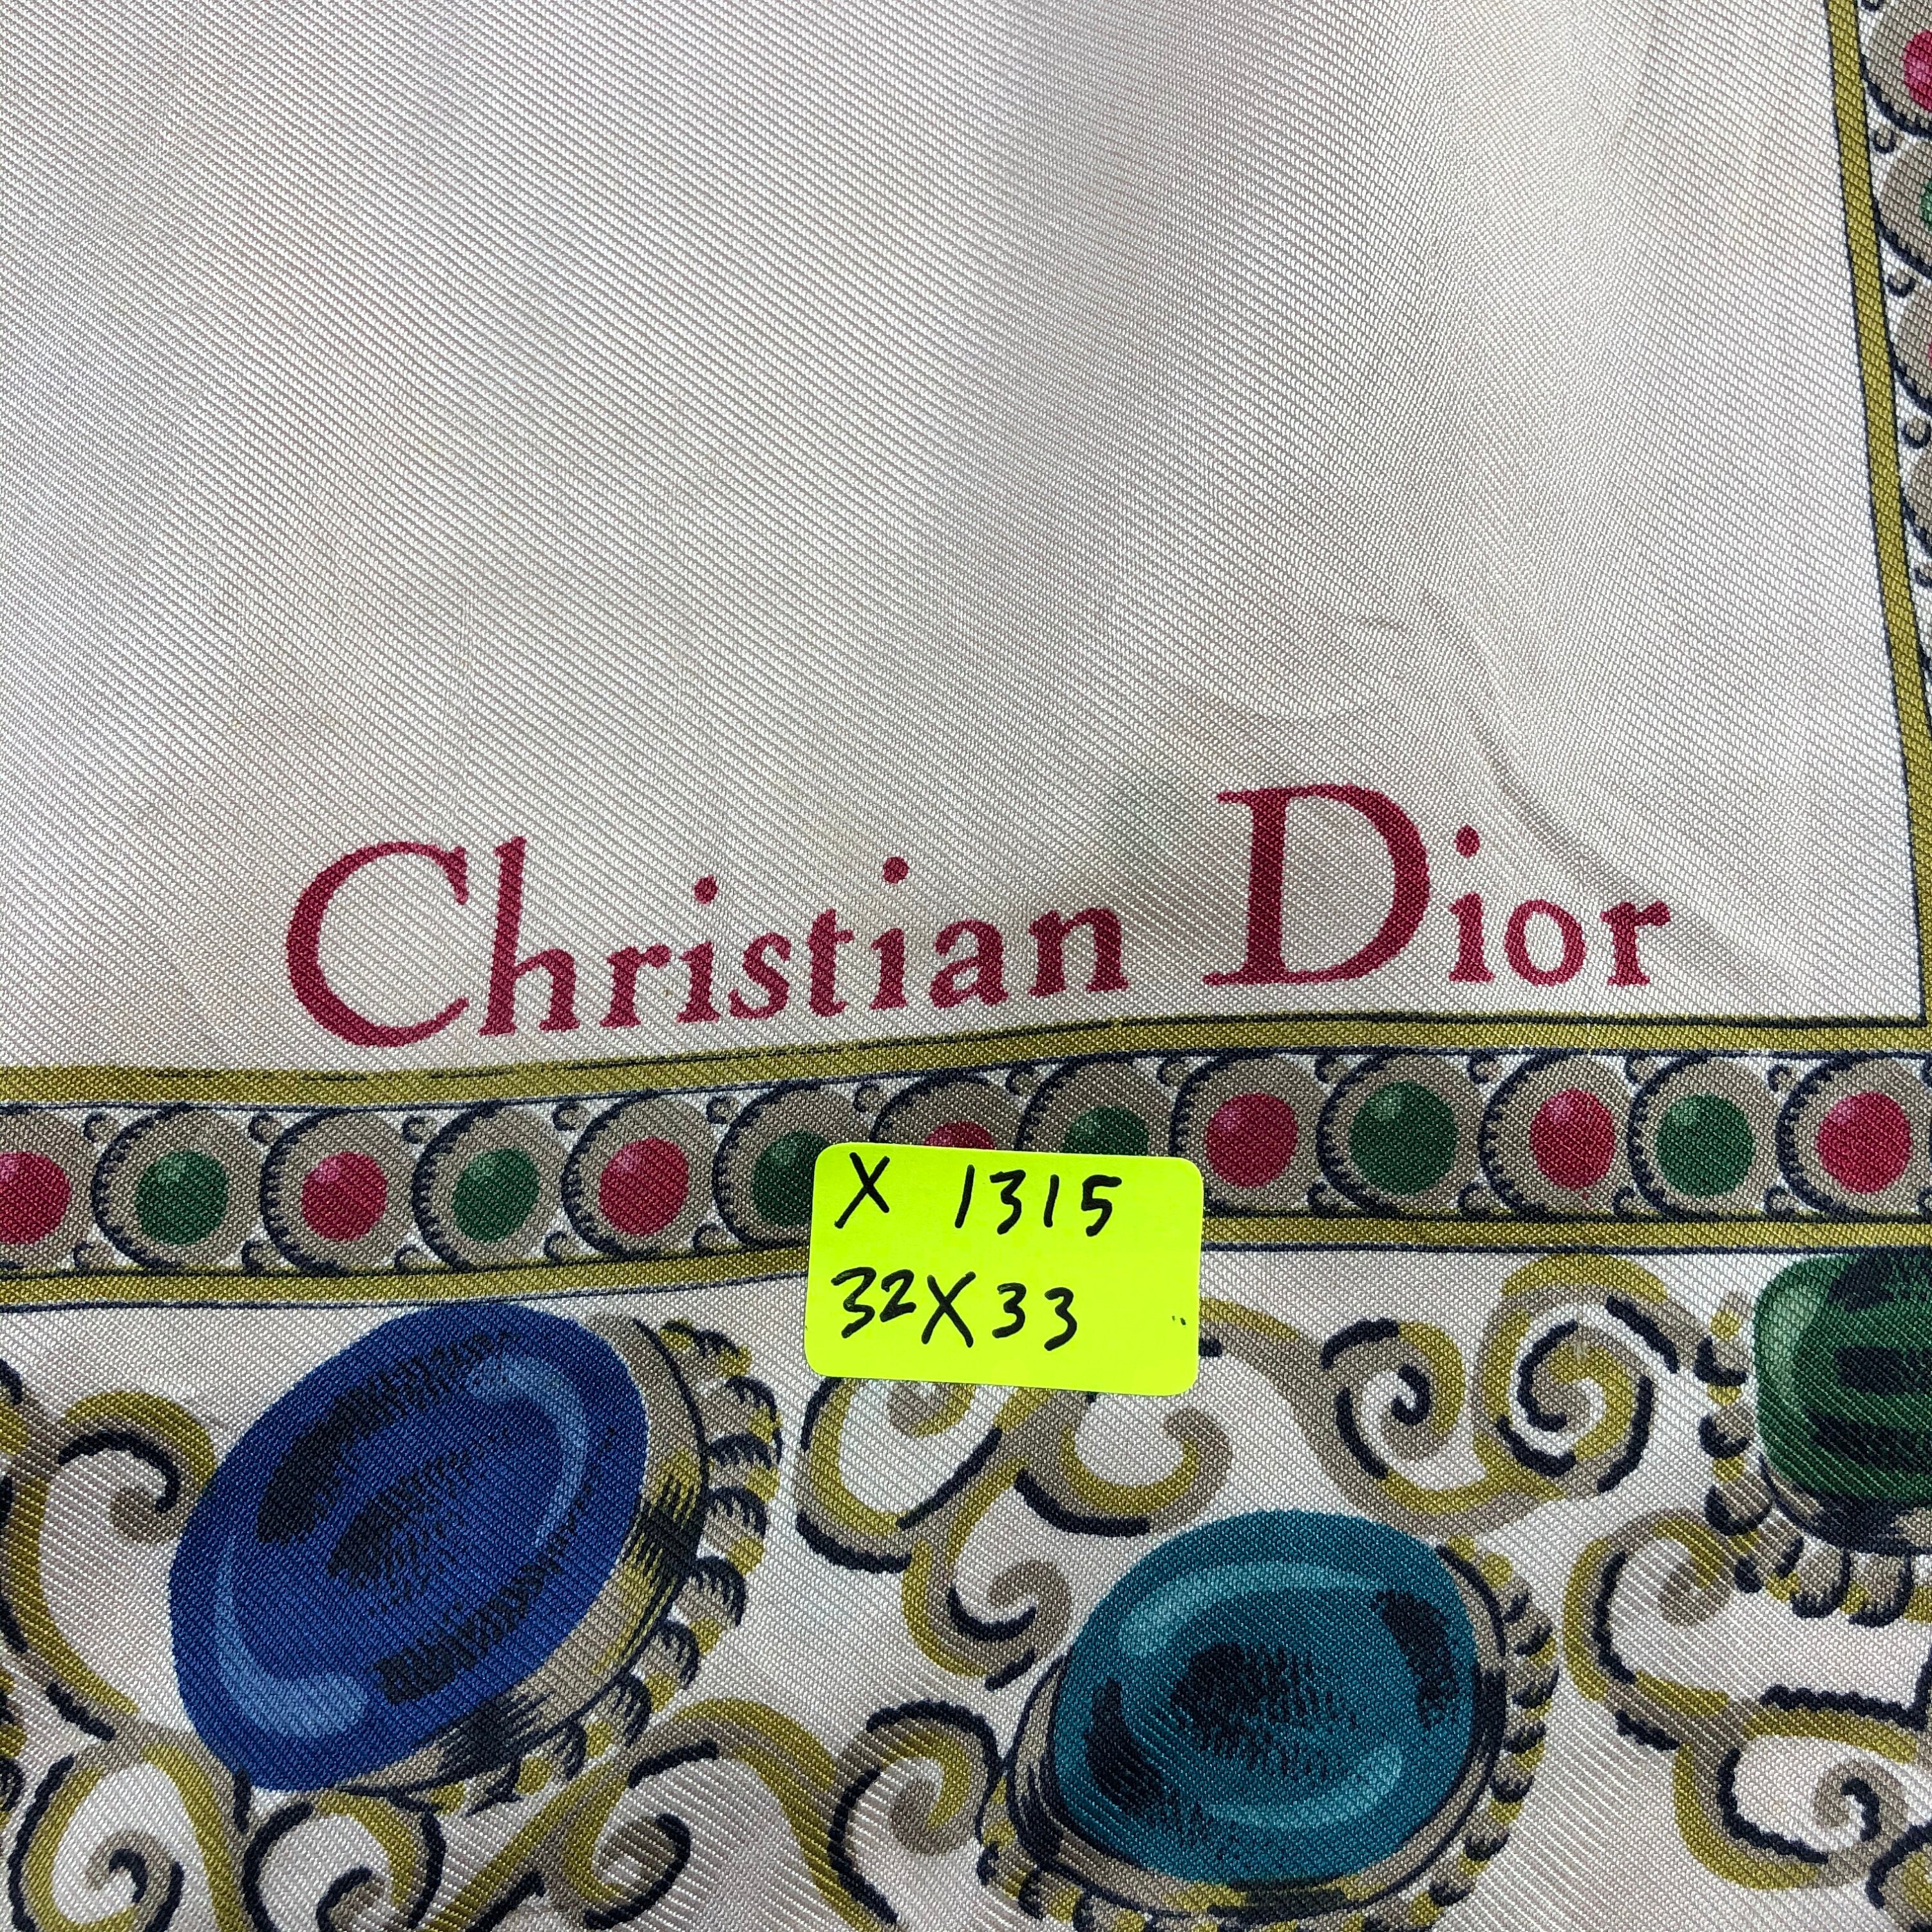 Authentic Christian Dior Monogram Silk Scarf 26x26 inches with Tag